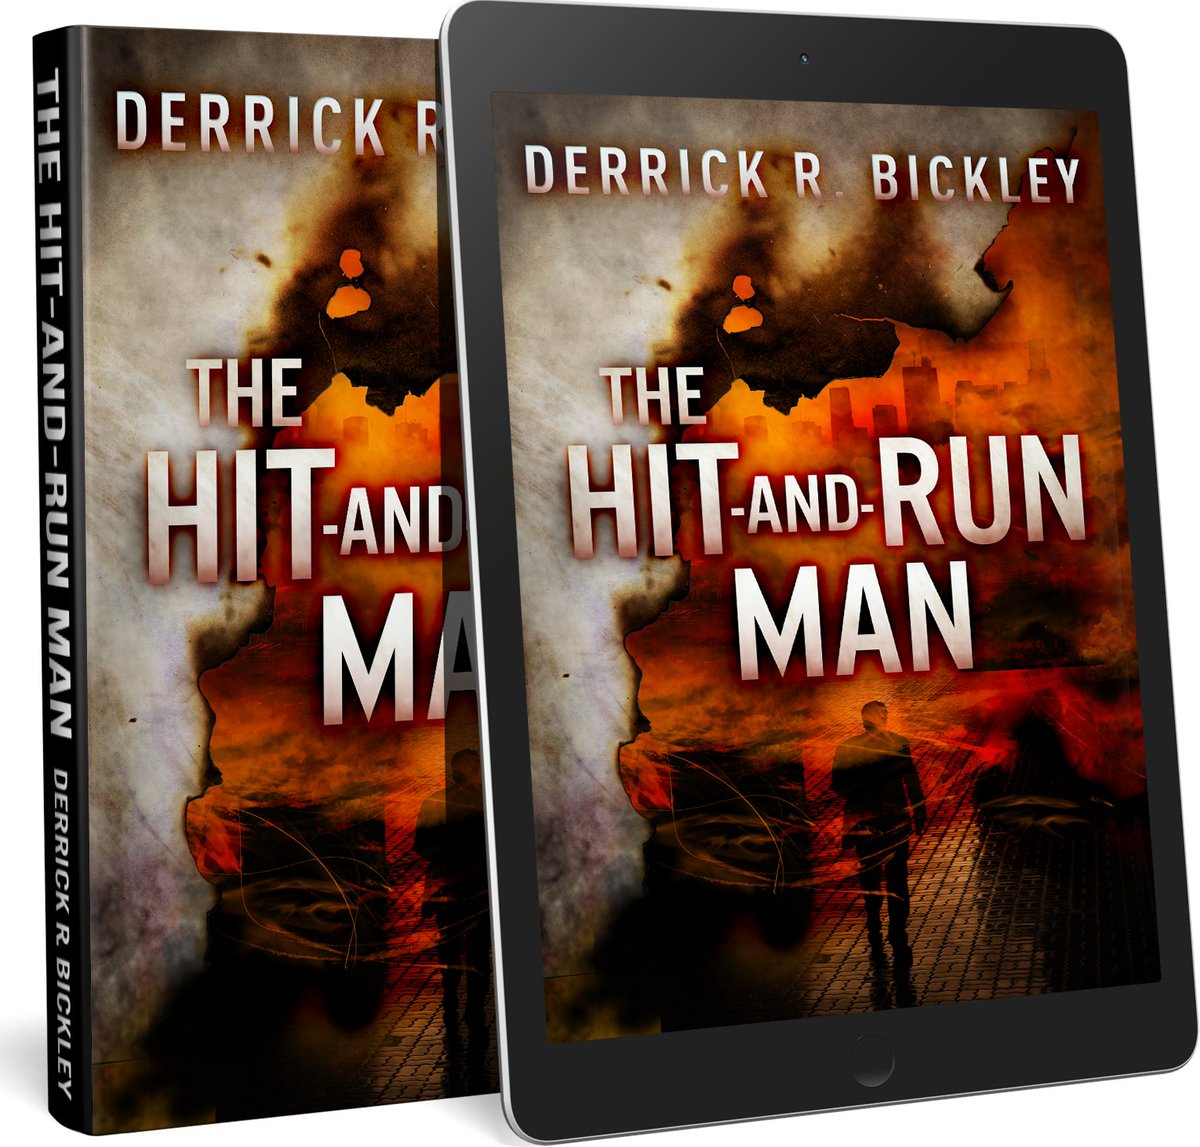 TWO men....TWO different lives....ONE deadly destiny mybook.to/HitAndRunMan THE HIT-AND-RUN MAN at #Kindle or your favourite digital store in PAPERBACK HARDBACK (Amzn inc L/Print  B&N inc L/Print  Wmart) AUDIOBOOK #NextChapterPub #crimethriller #crimefiction #mustread #crime